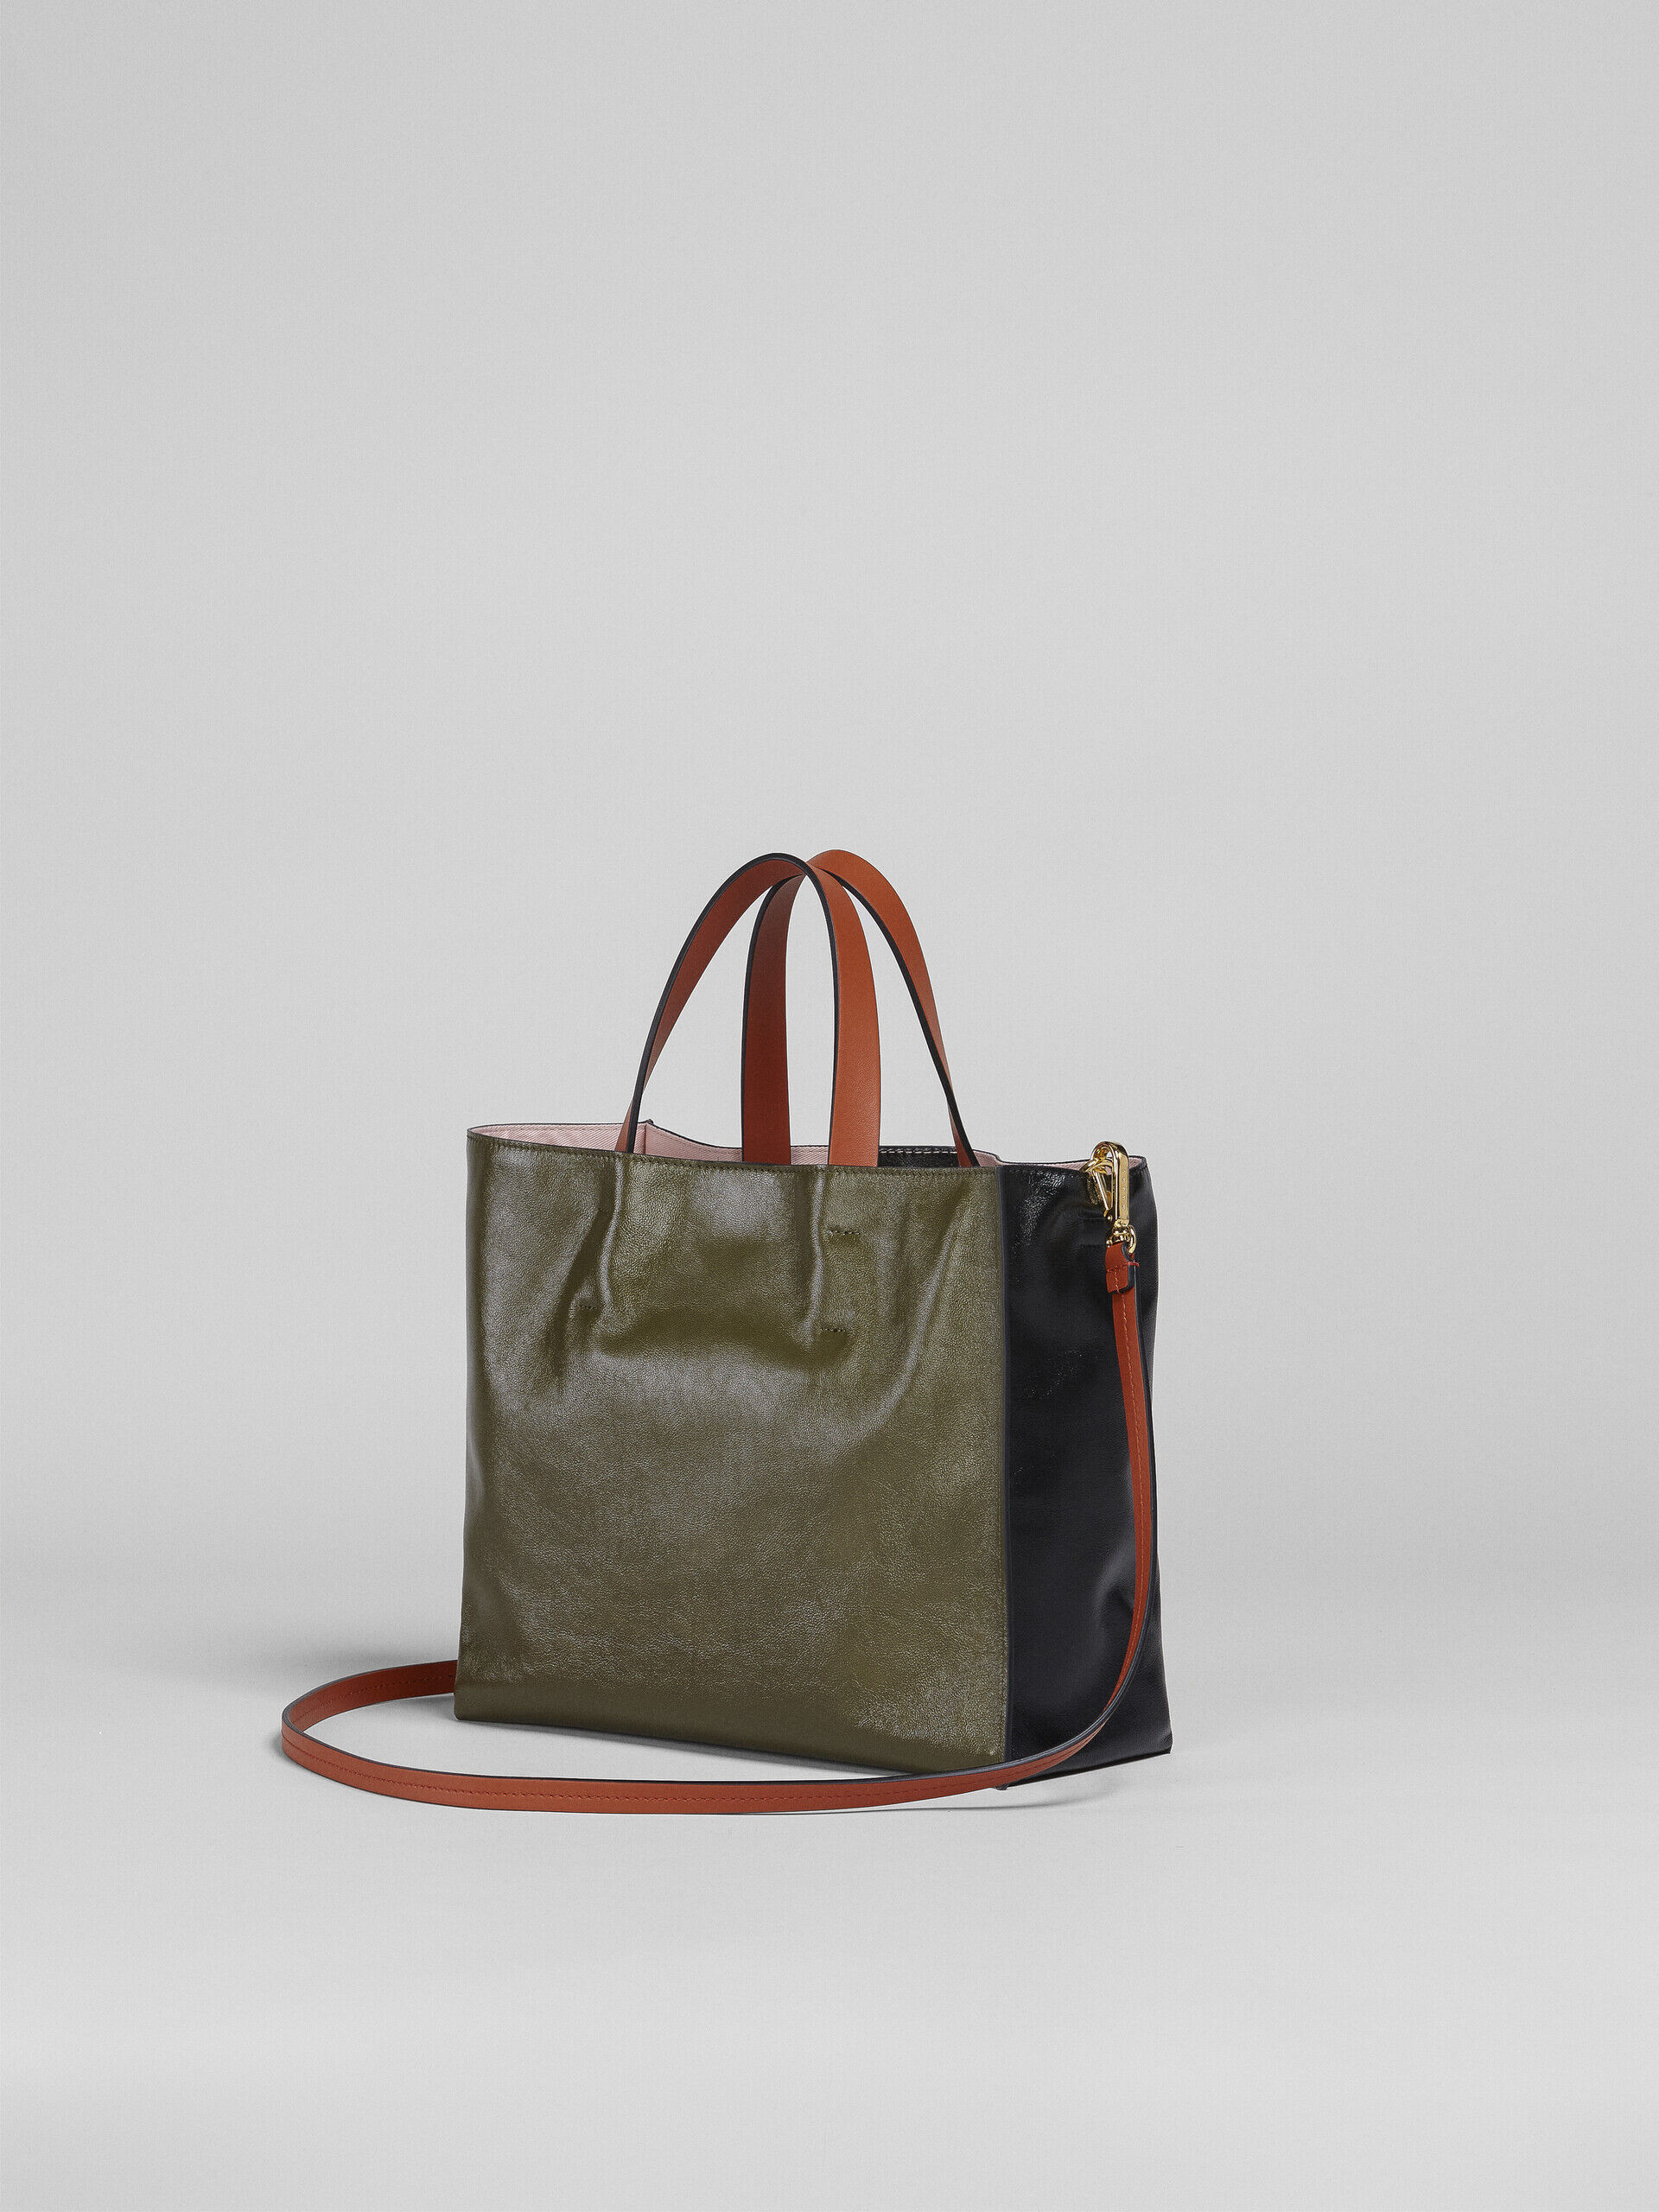 MUSEO SOFT small bag in black green and orange leather | Marni